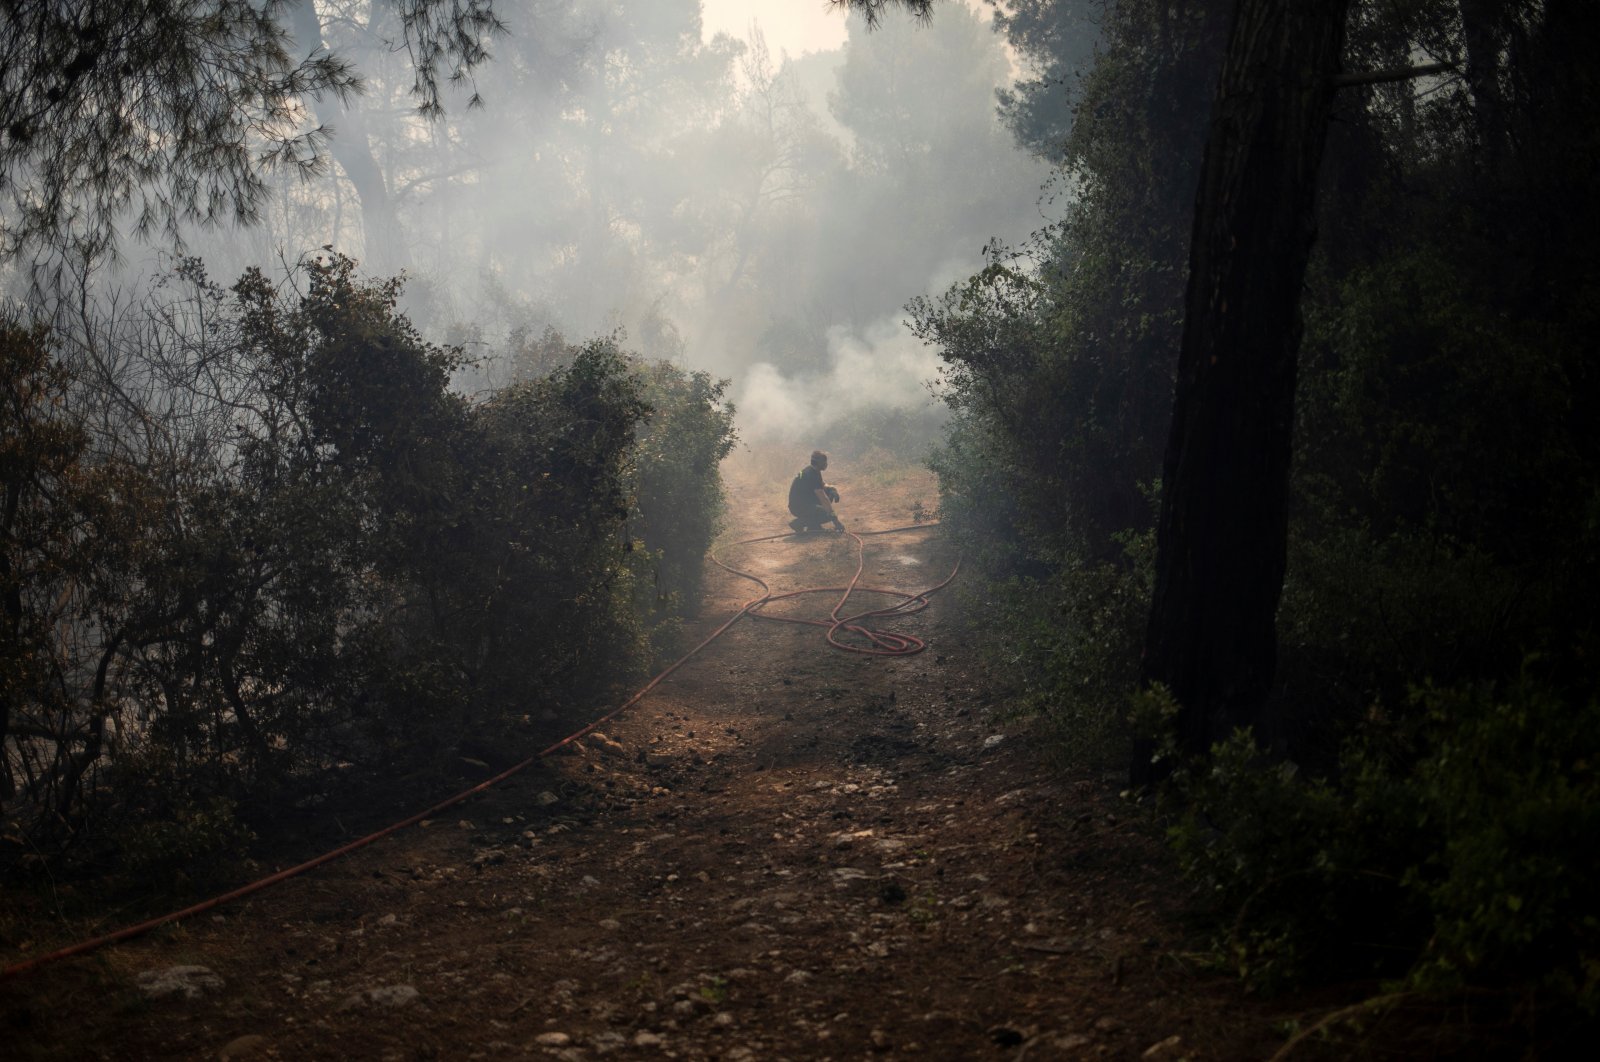 A firefighter pauses as he tries to extinguish a fire burning in the village of Mazi, near Corinth, Greece, May 20, 2021. (Reuters Photo)